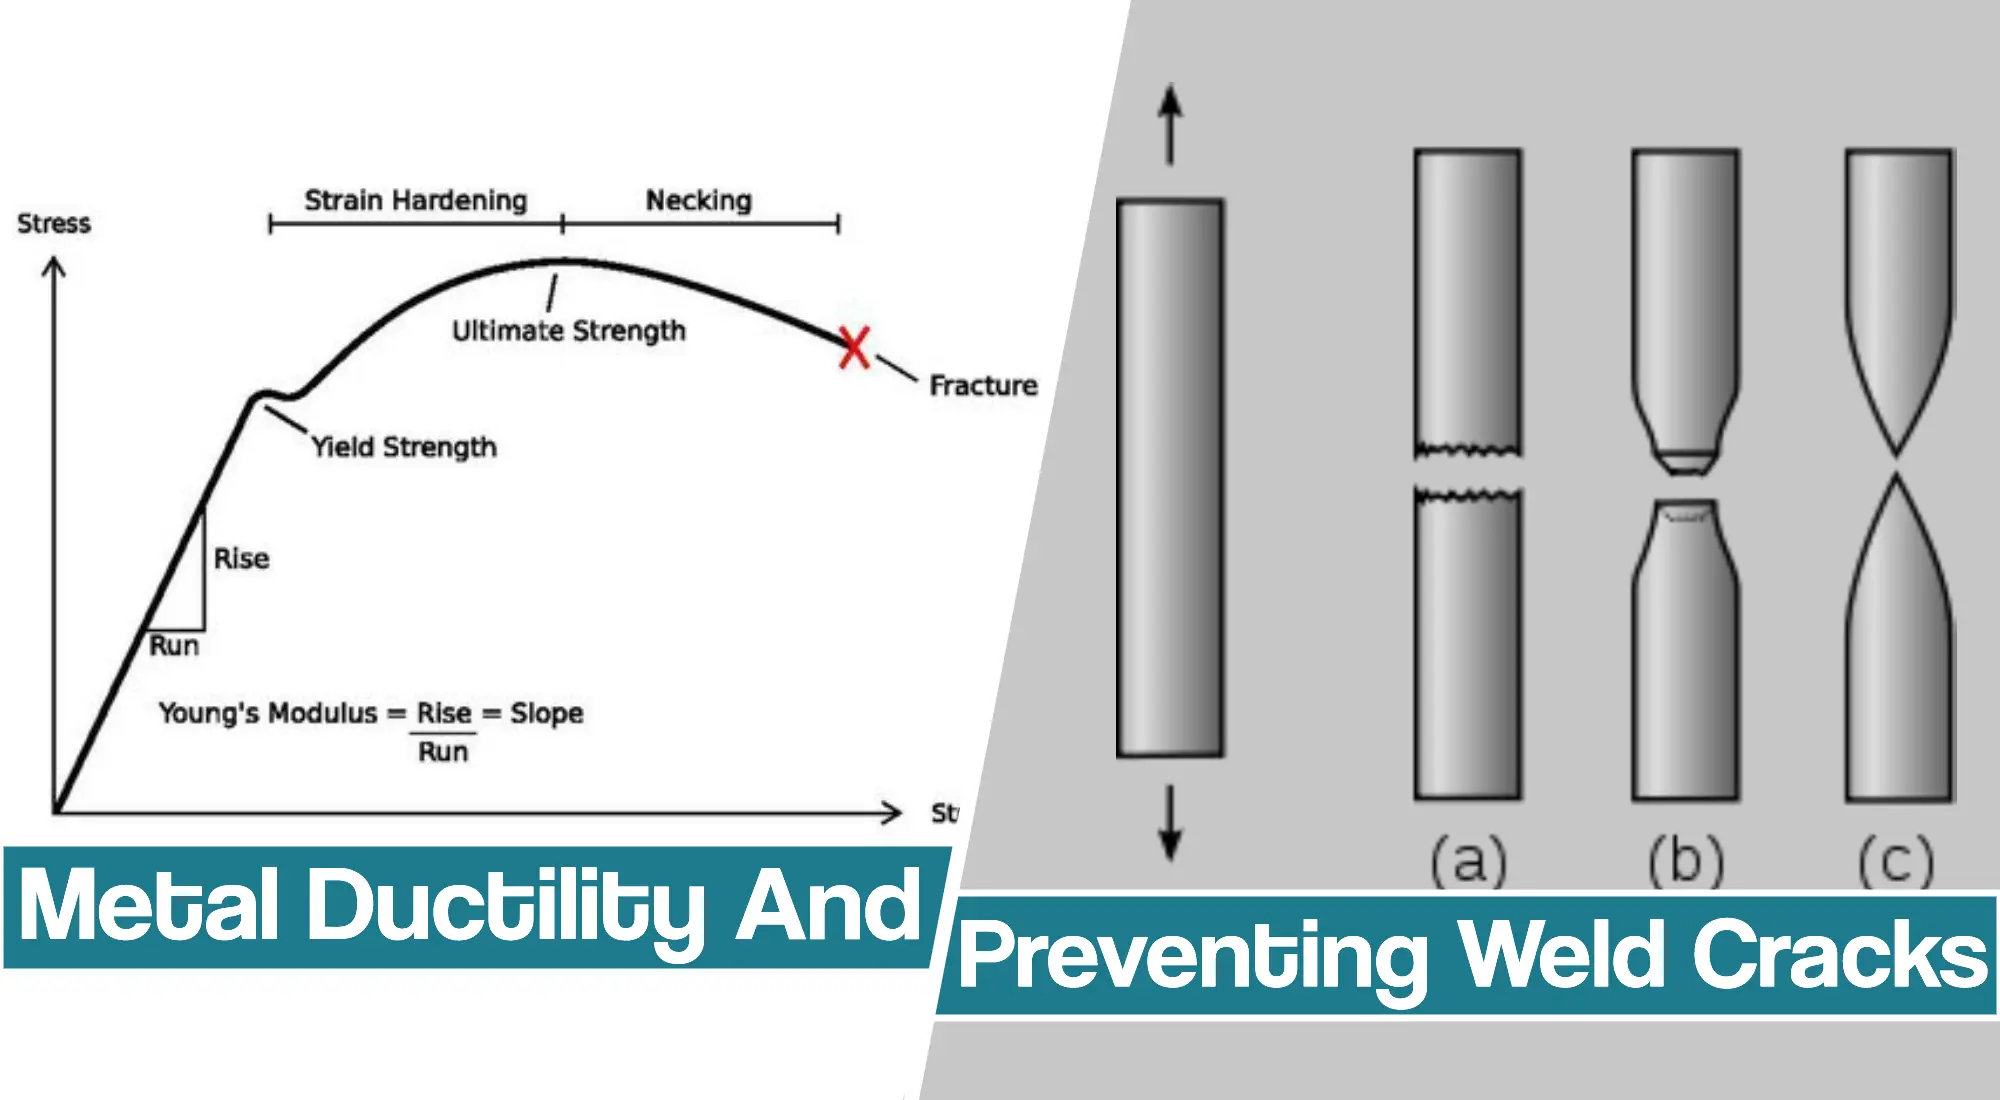 Featured image for the Ductility In Welding article